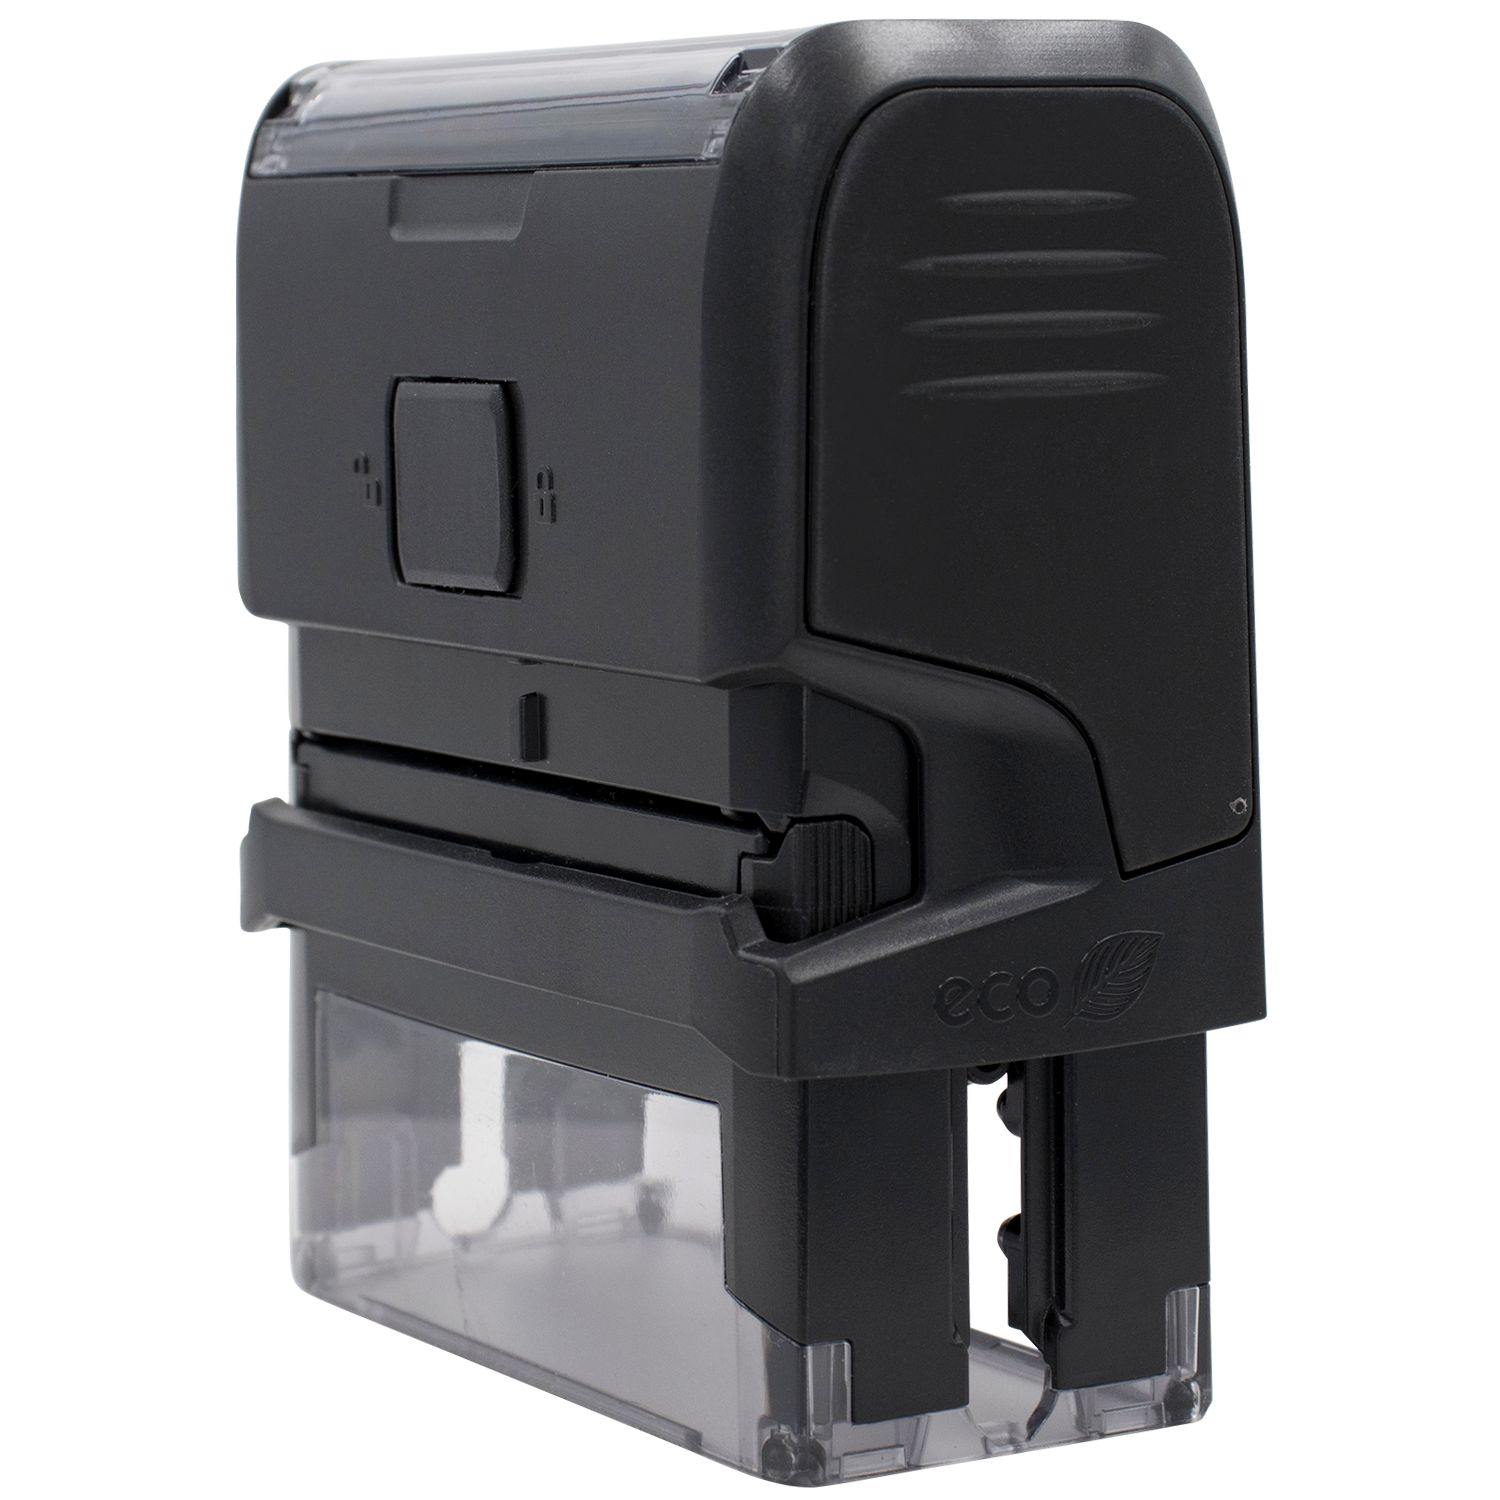 Self-Inking I like it Stamp - Engineer Seal Stamps - Brand_Trodat, Impression Size_Small, Stamp Type_Self-Inking Stamp, Type of Use_General, Type of Use_Teacher